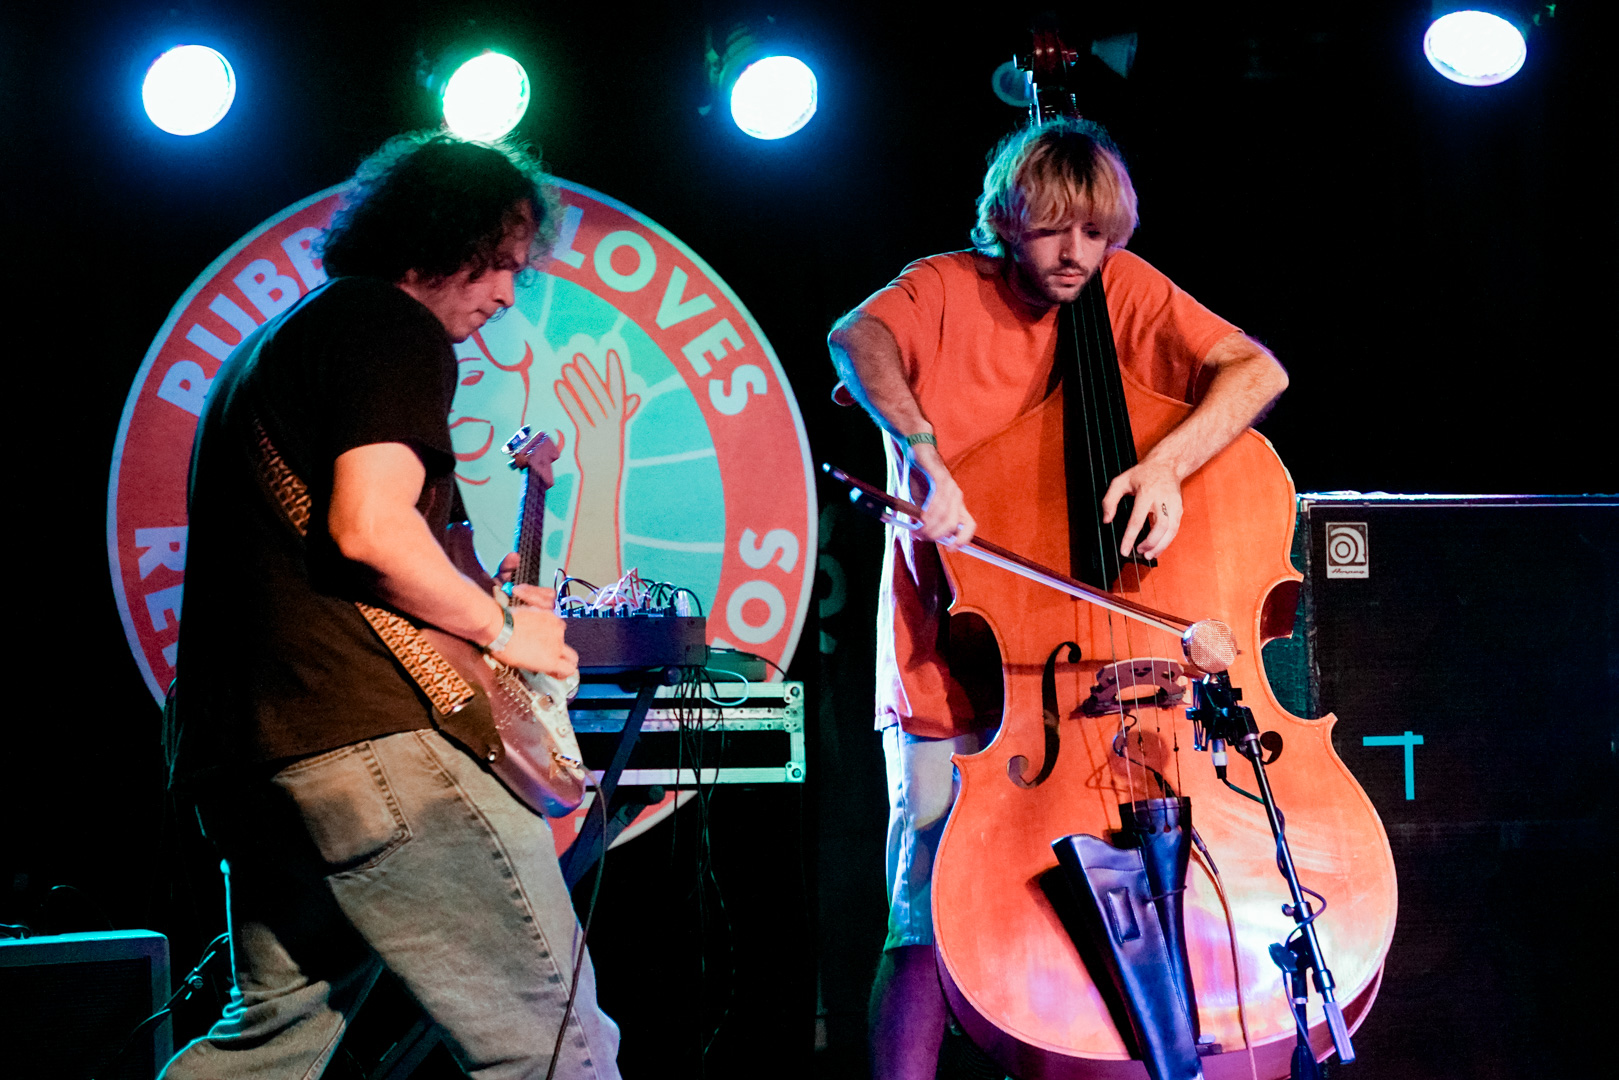 A guitarist and upright bass player on stage